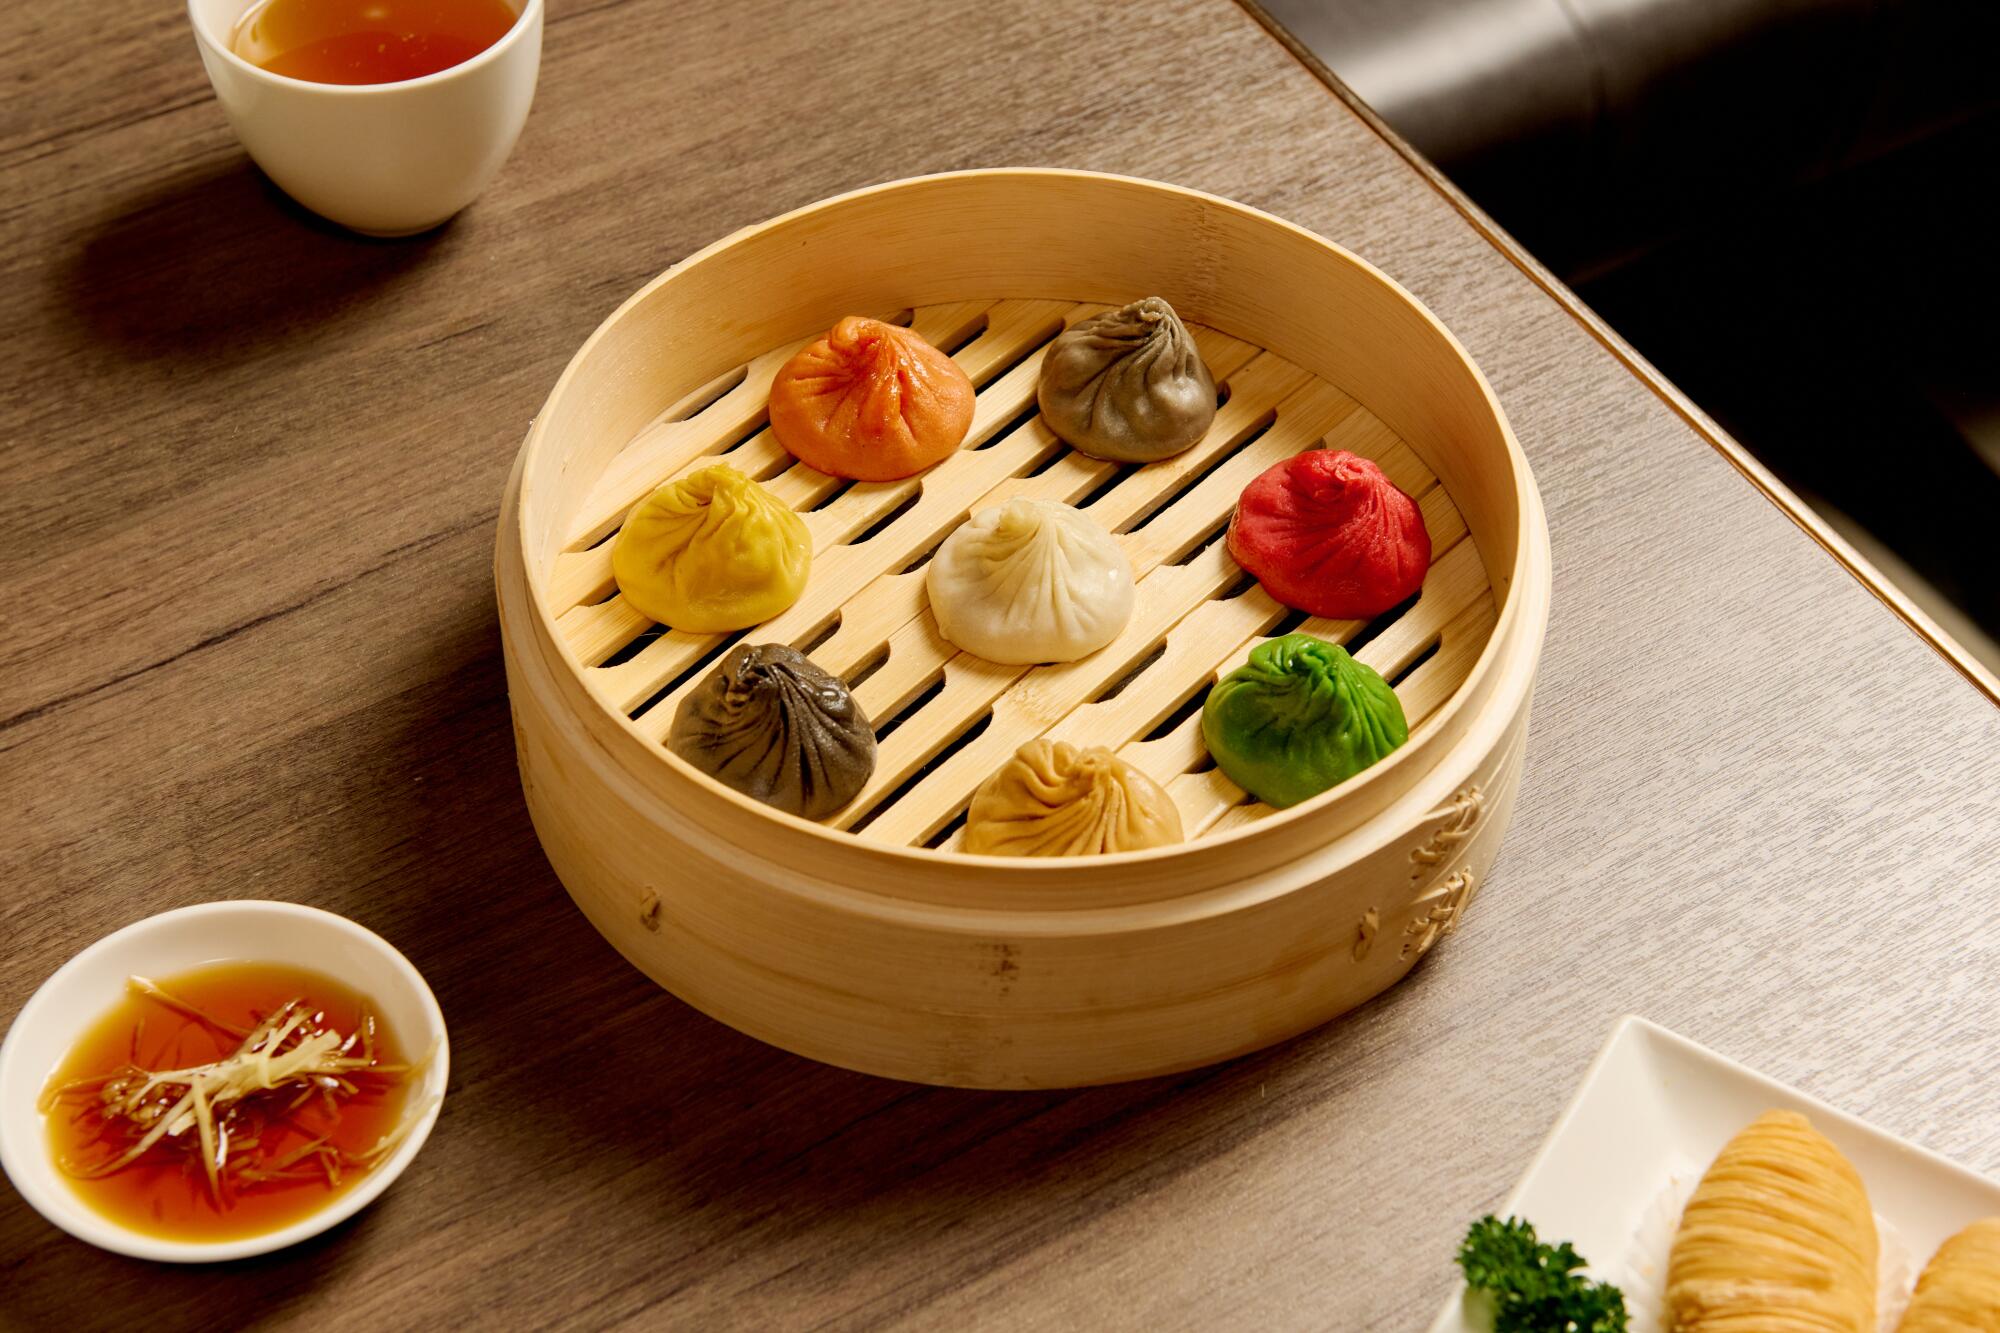 A rainbow of soup dumplings in a steamer with small dishes of sauces